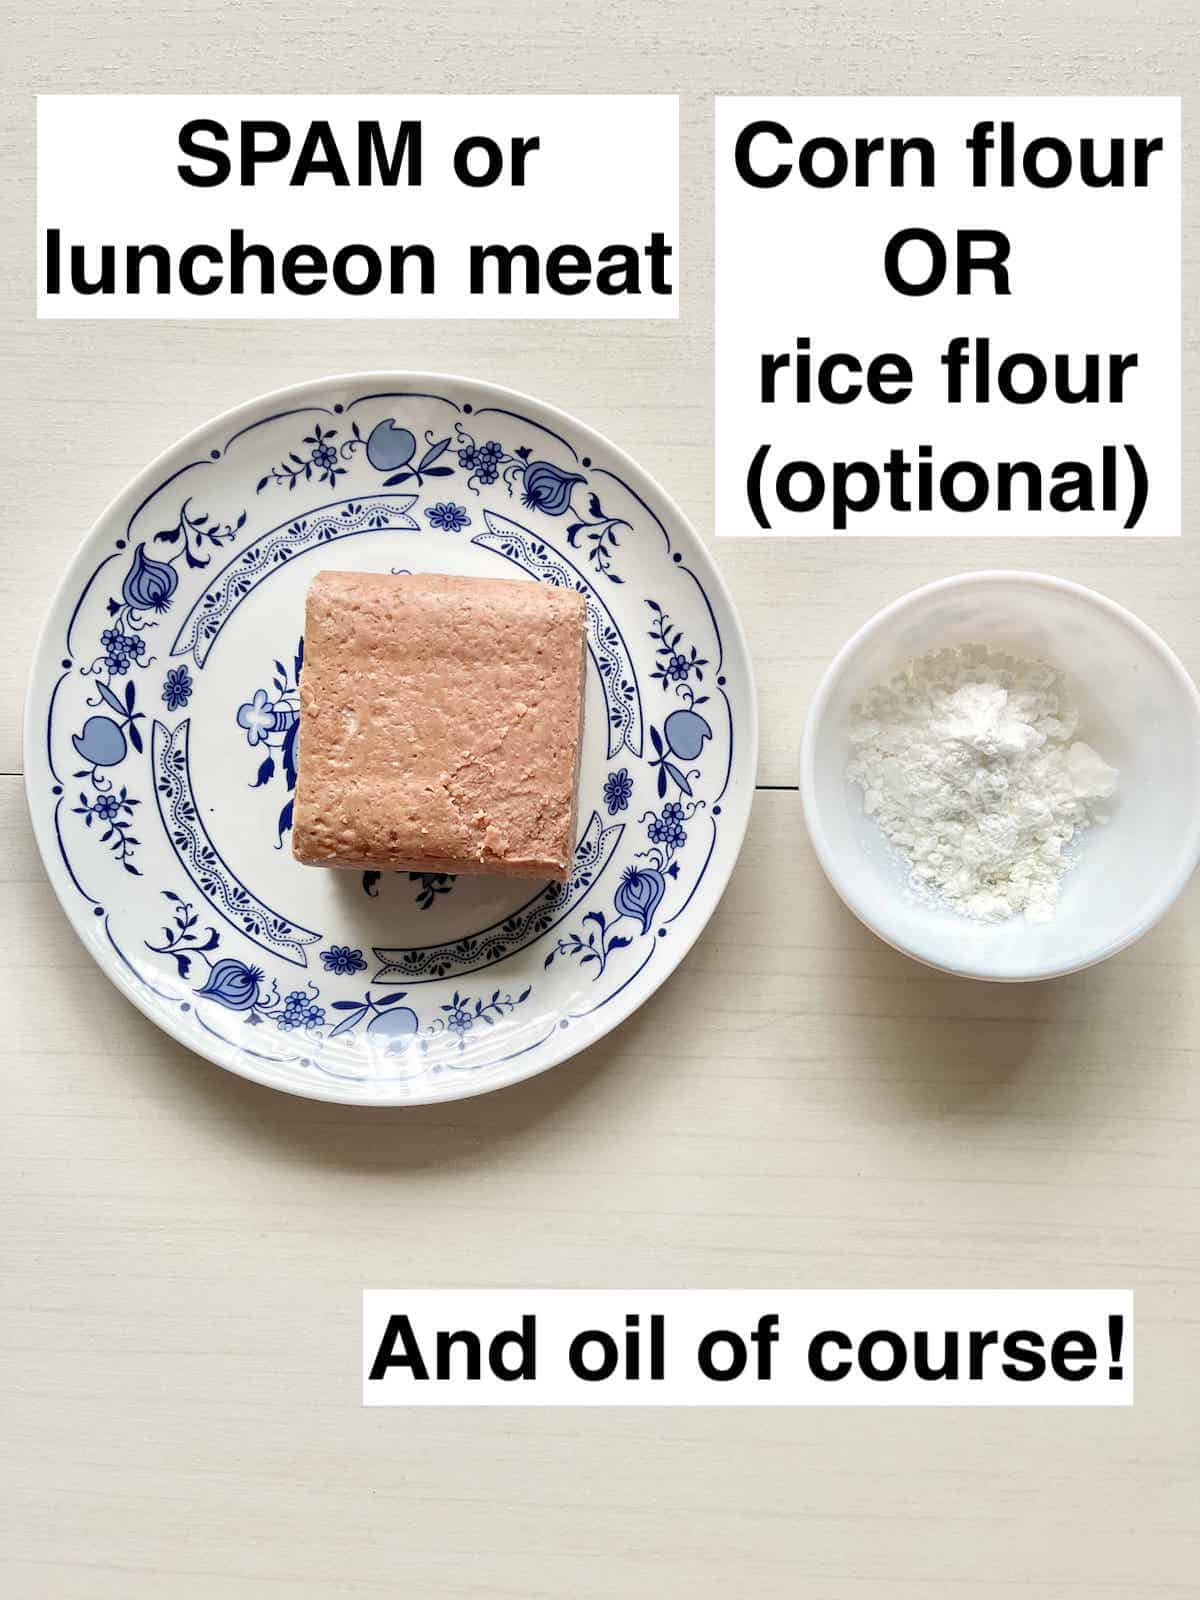 A plate of luncheon meat next to a bowl of flour.